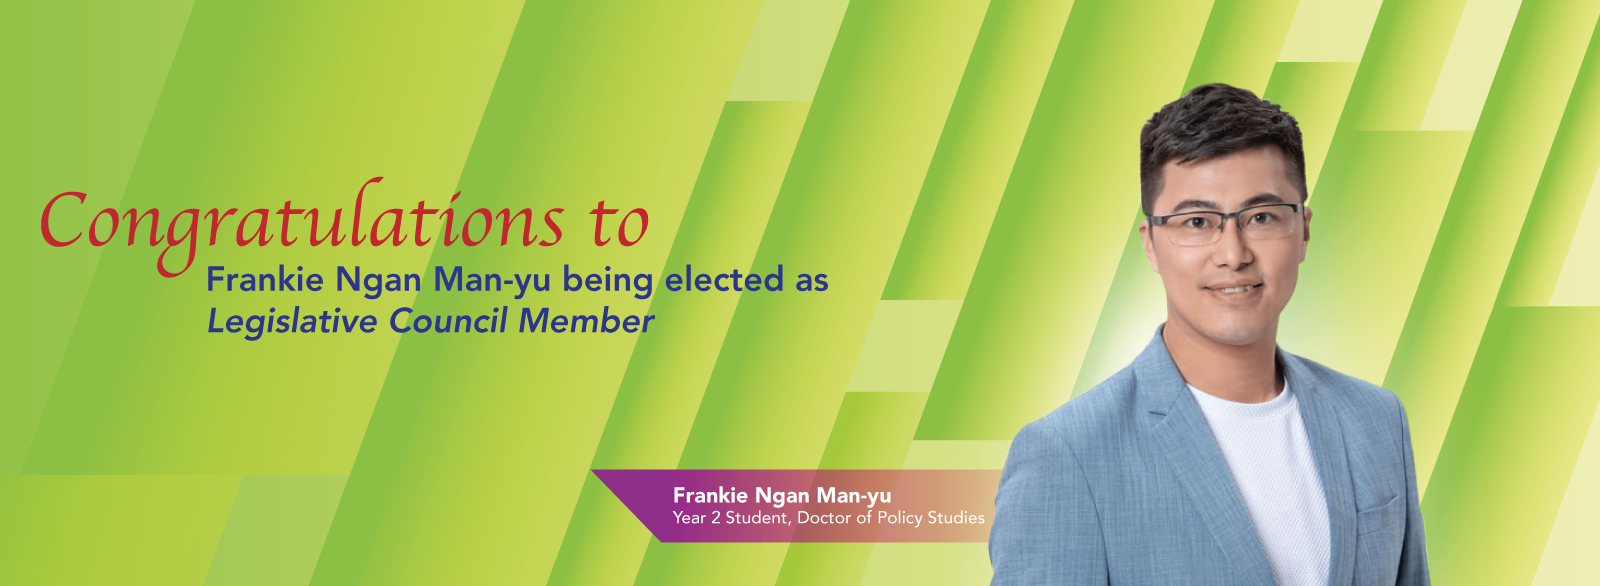 Congratulations to Frankie Ngan Man-yu being elected as Legislative Council Member